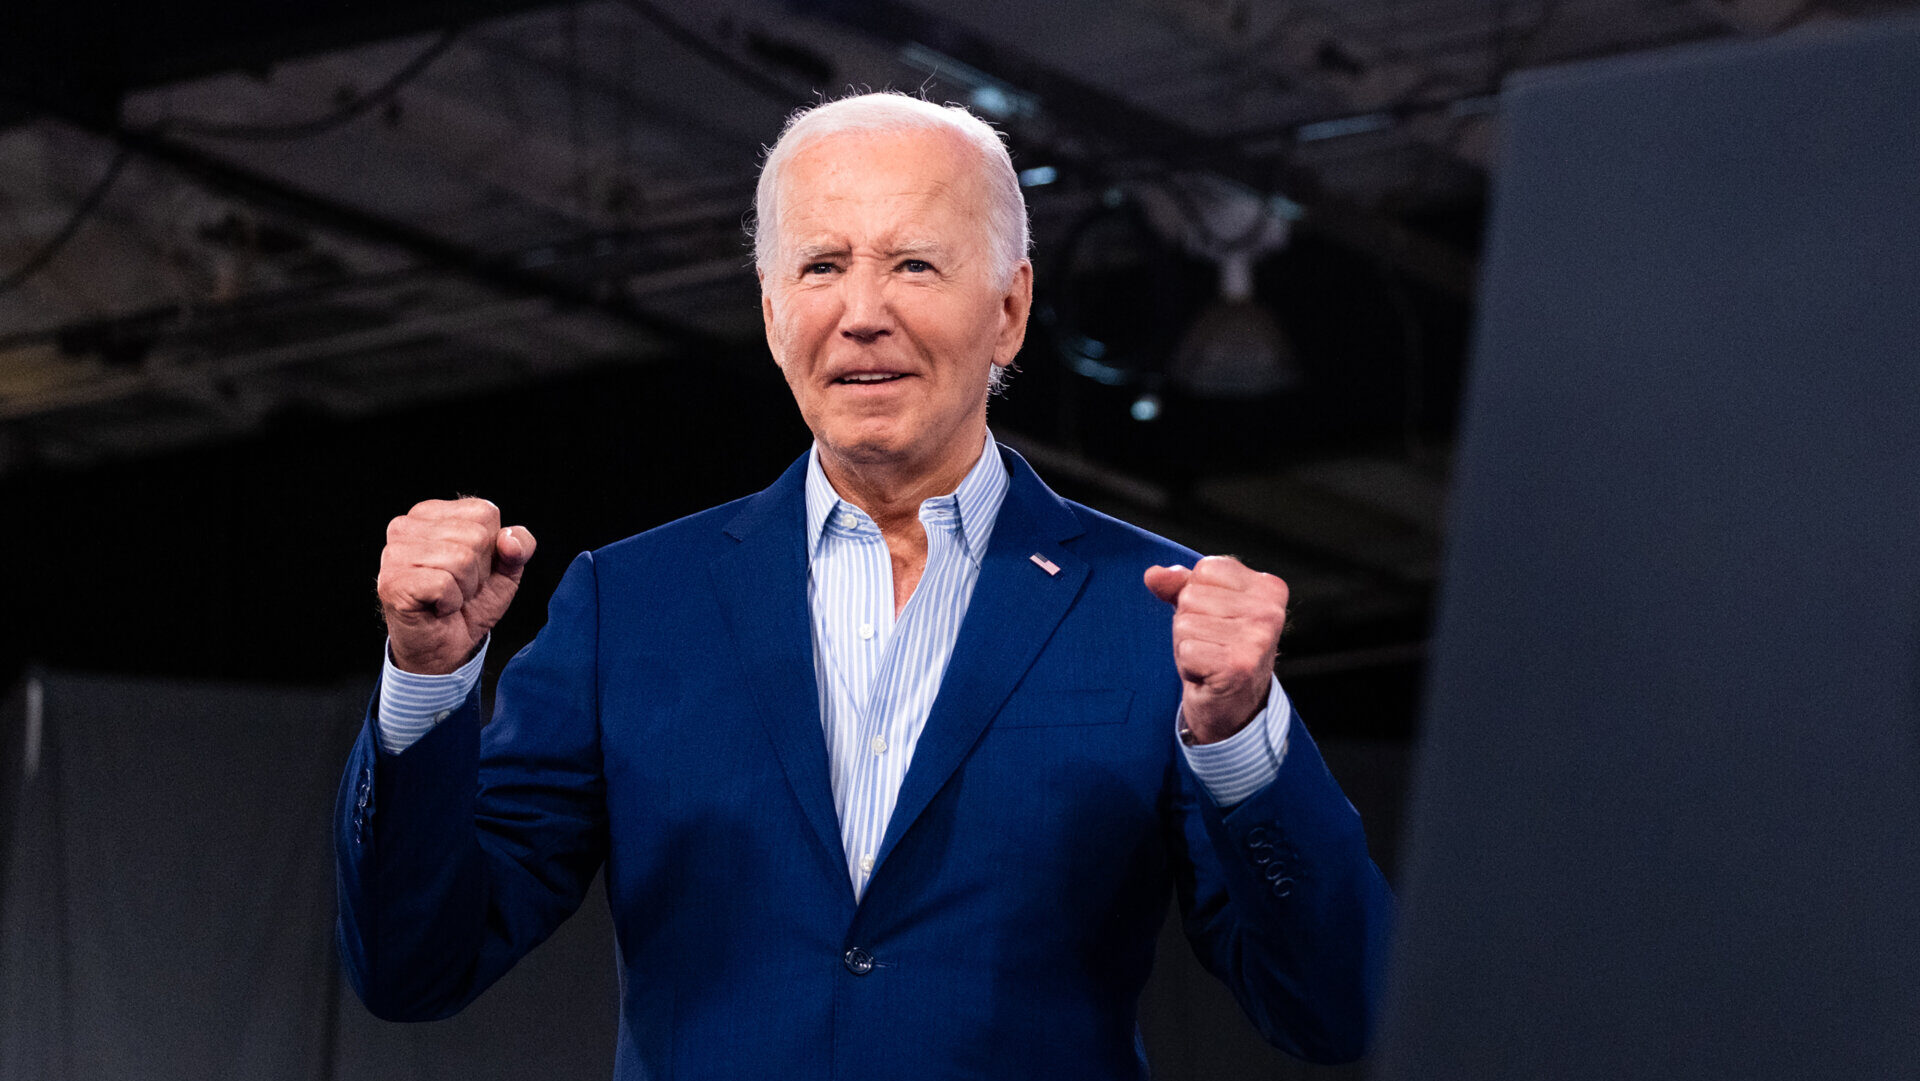 President Joe Biden during a campaign event at the North Carolina State Fairgrounds in Raleigh, North Carolina, US, on Friday, June 28